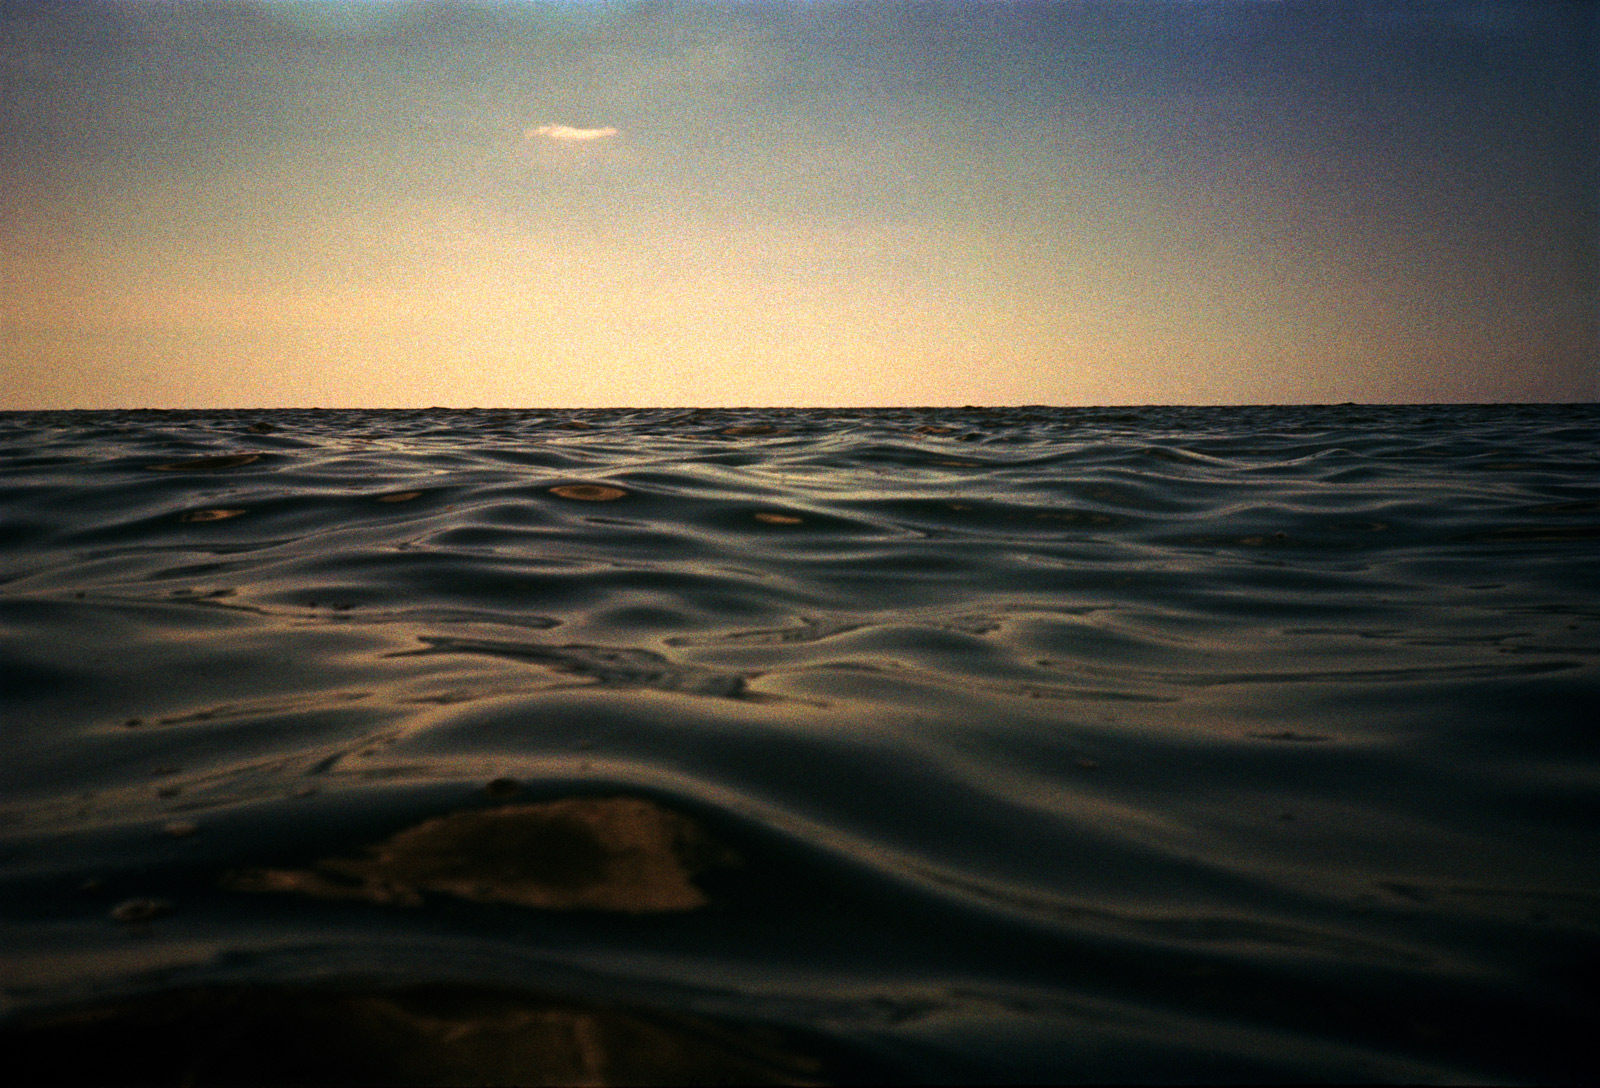 Reflections of the sea, analogue photography 35mm.